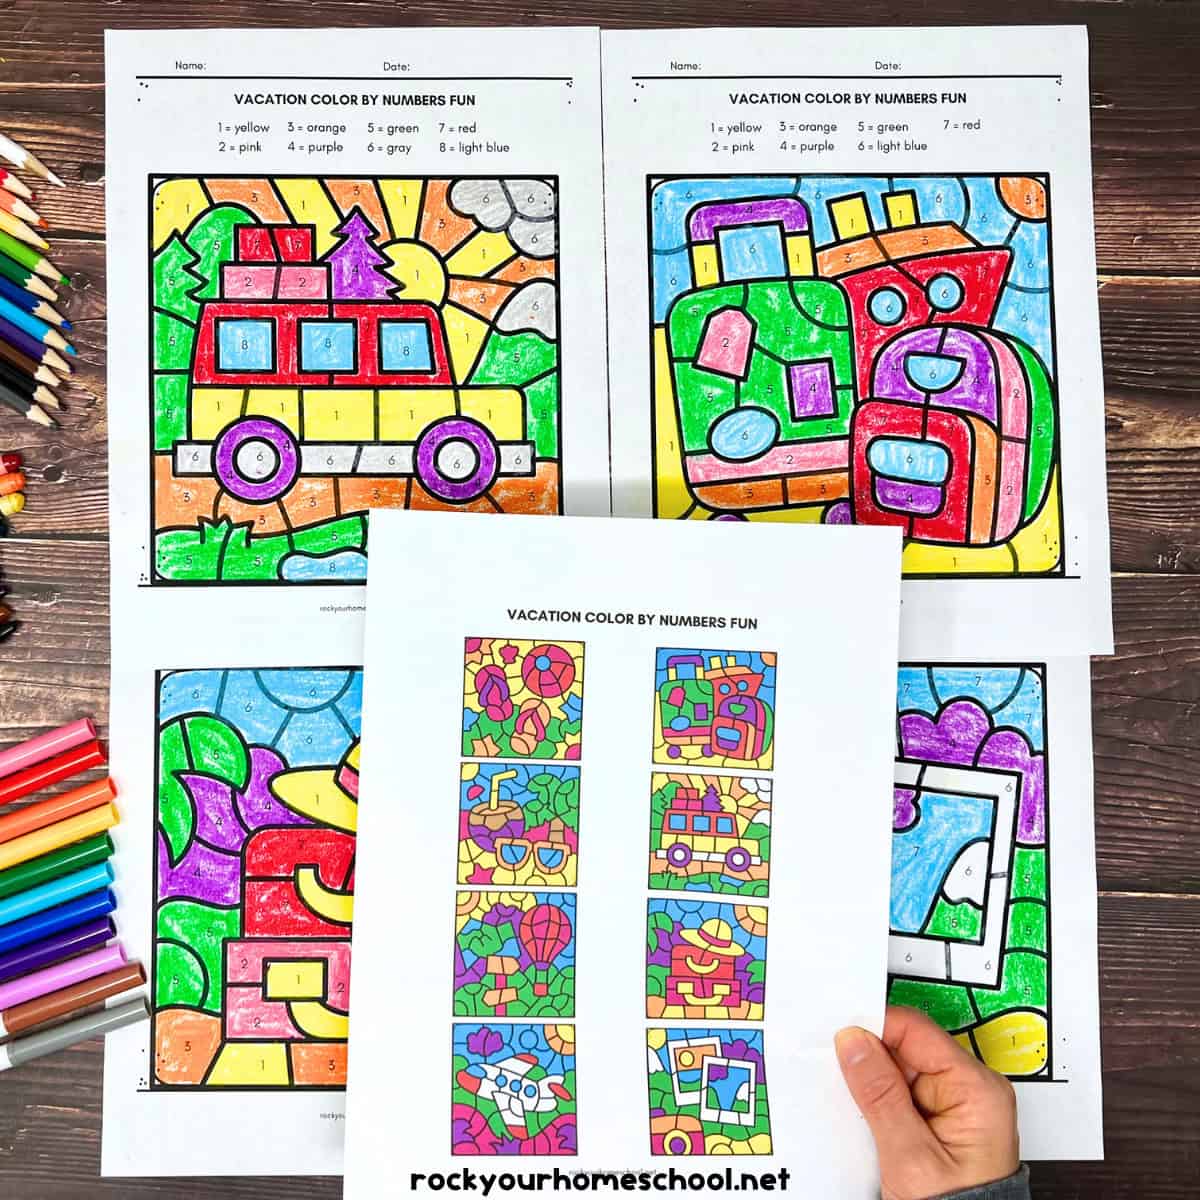 Four examples of free printable vacation color by number pages with woman holding answer key.